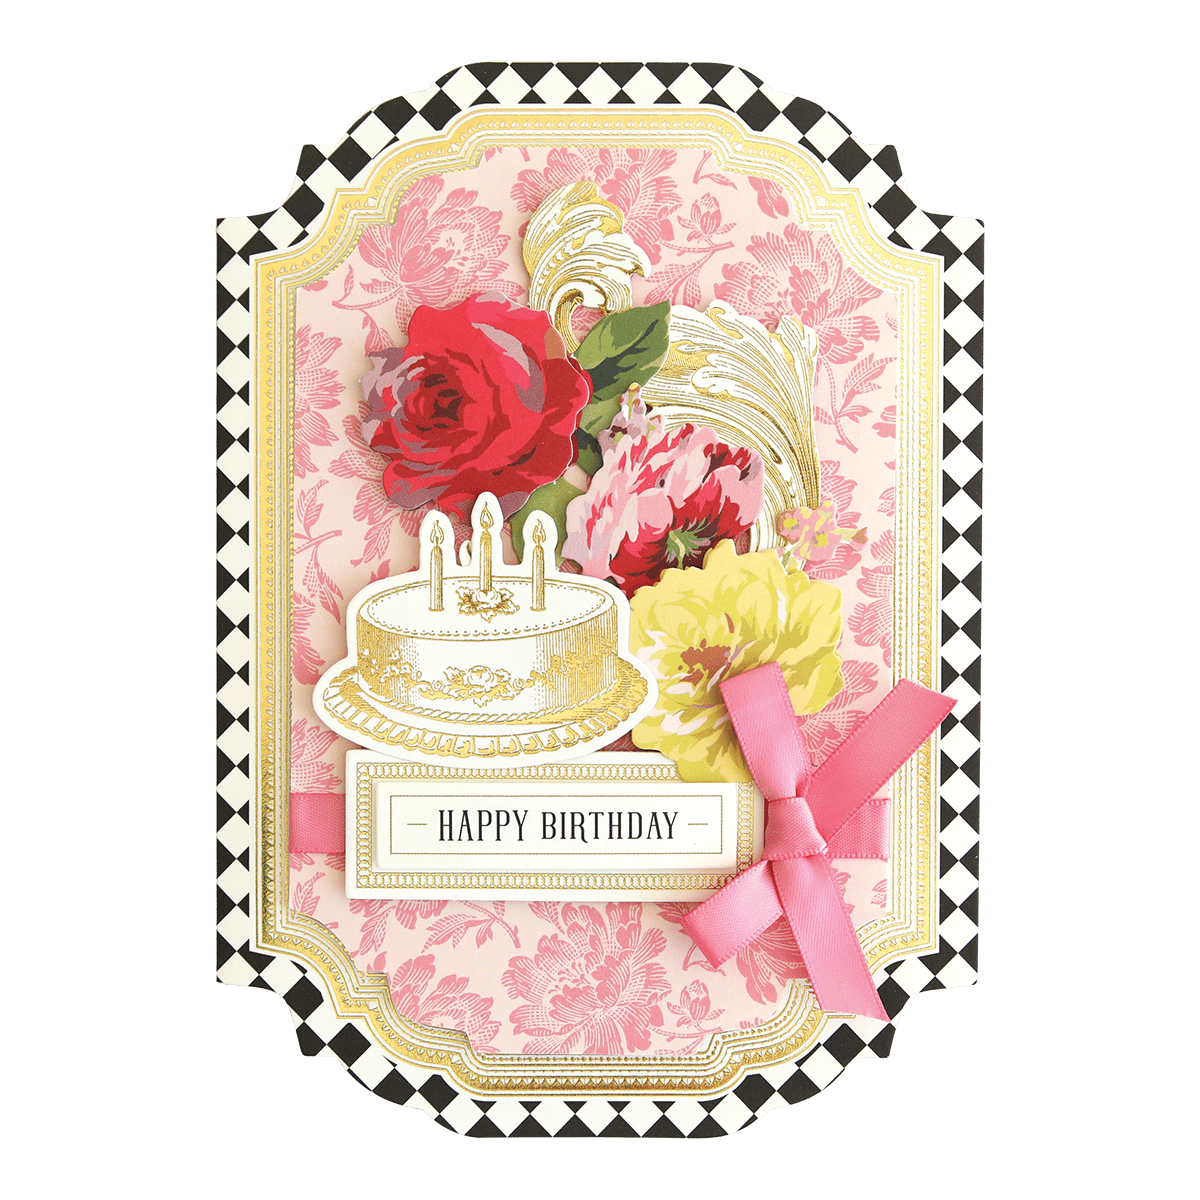 a birthday card with roses and a cake.